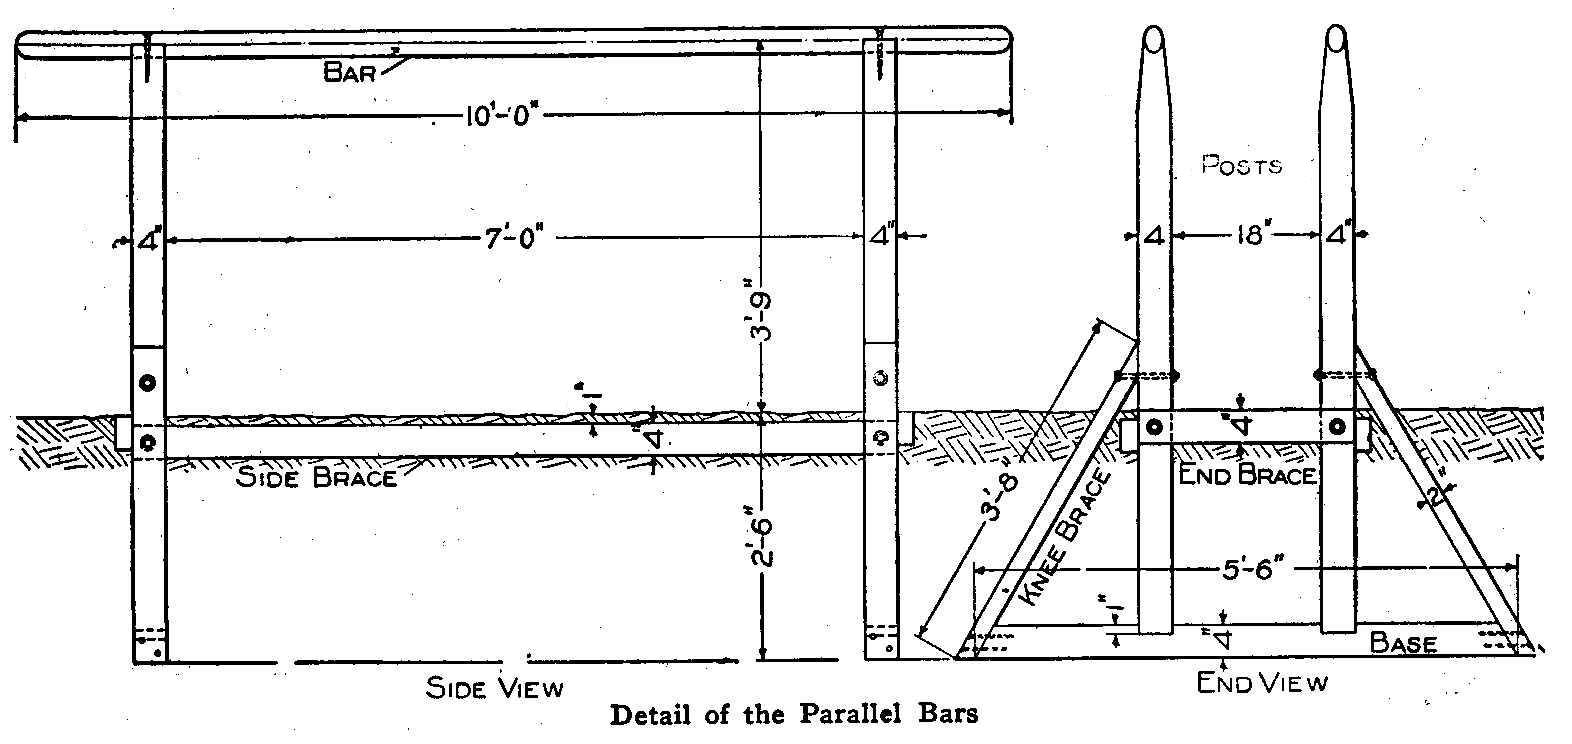 Detail of the Parallel Bars